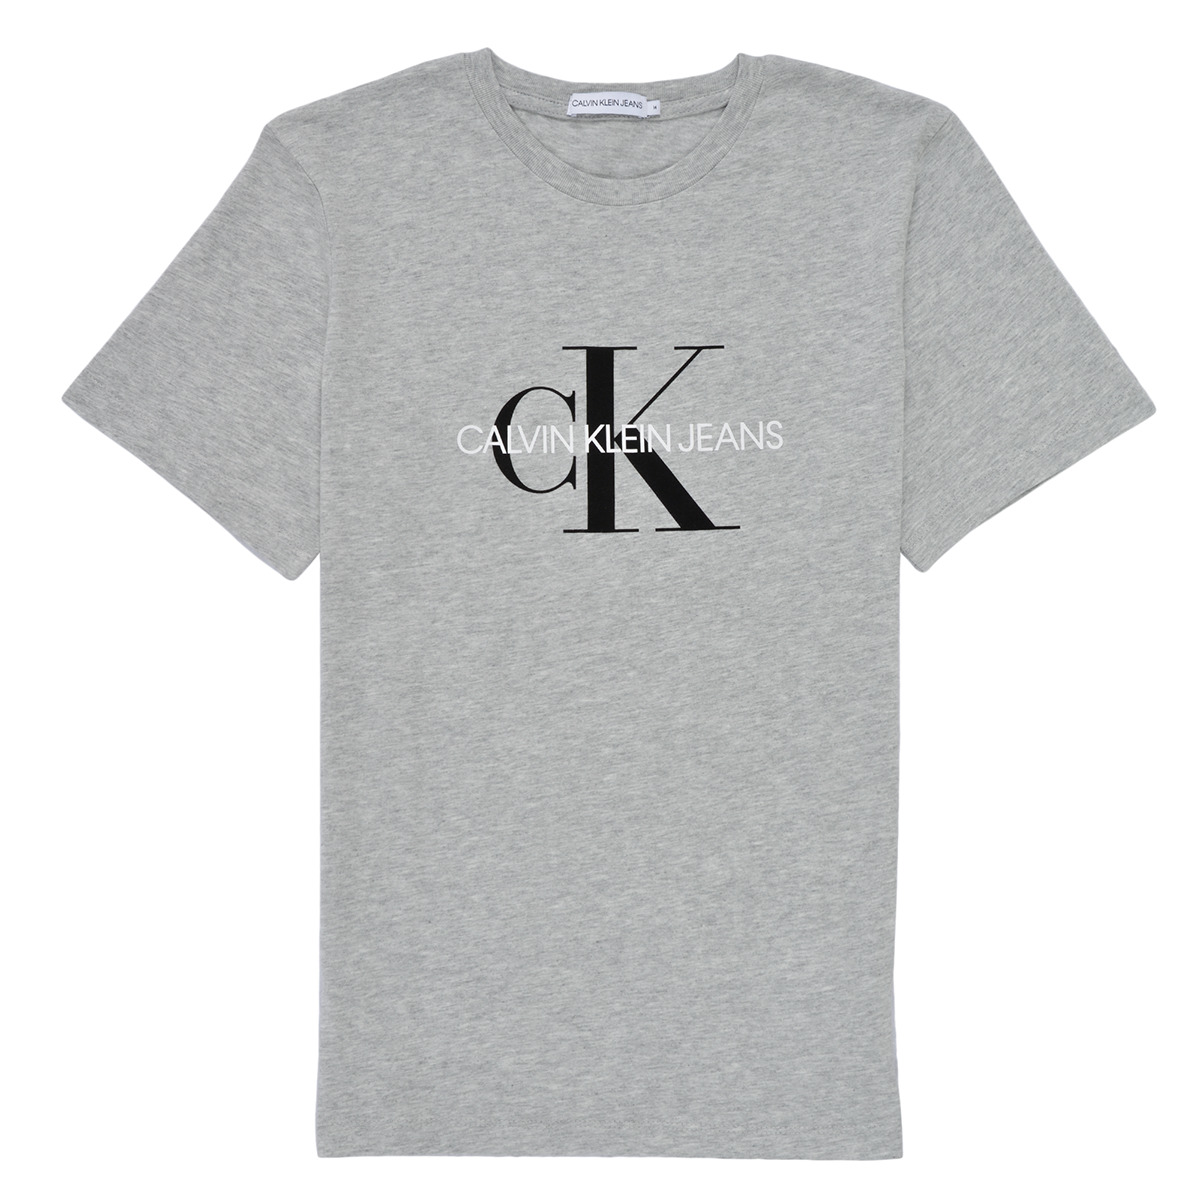 Calvin Klein Jeans MONOGRAM Grey - Fast delivery | Spartoo Europe ! -  Clothing short-sleeved t-shirts Child 30,40 € | T-Shirts